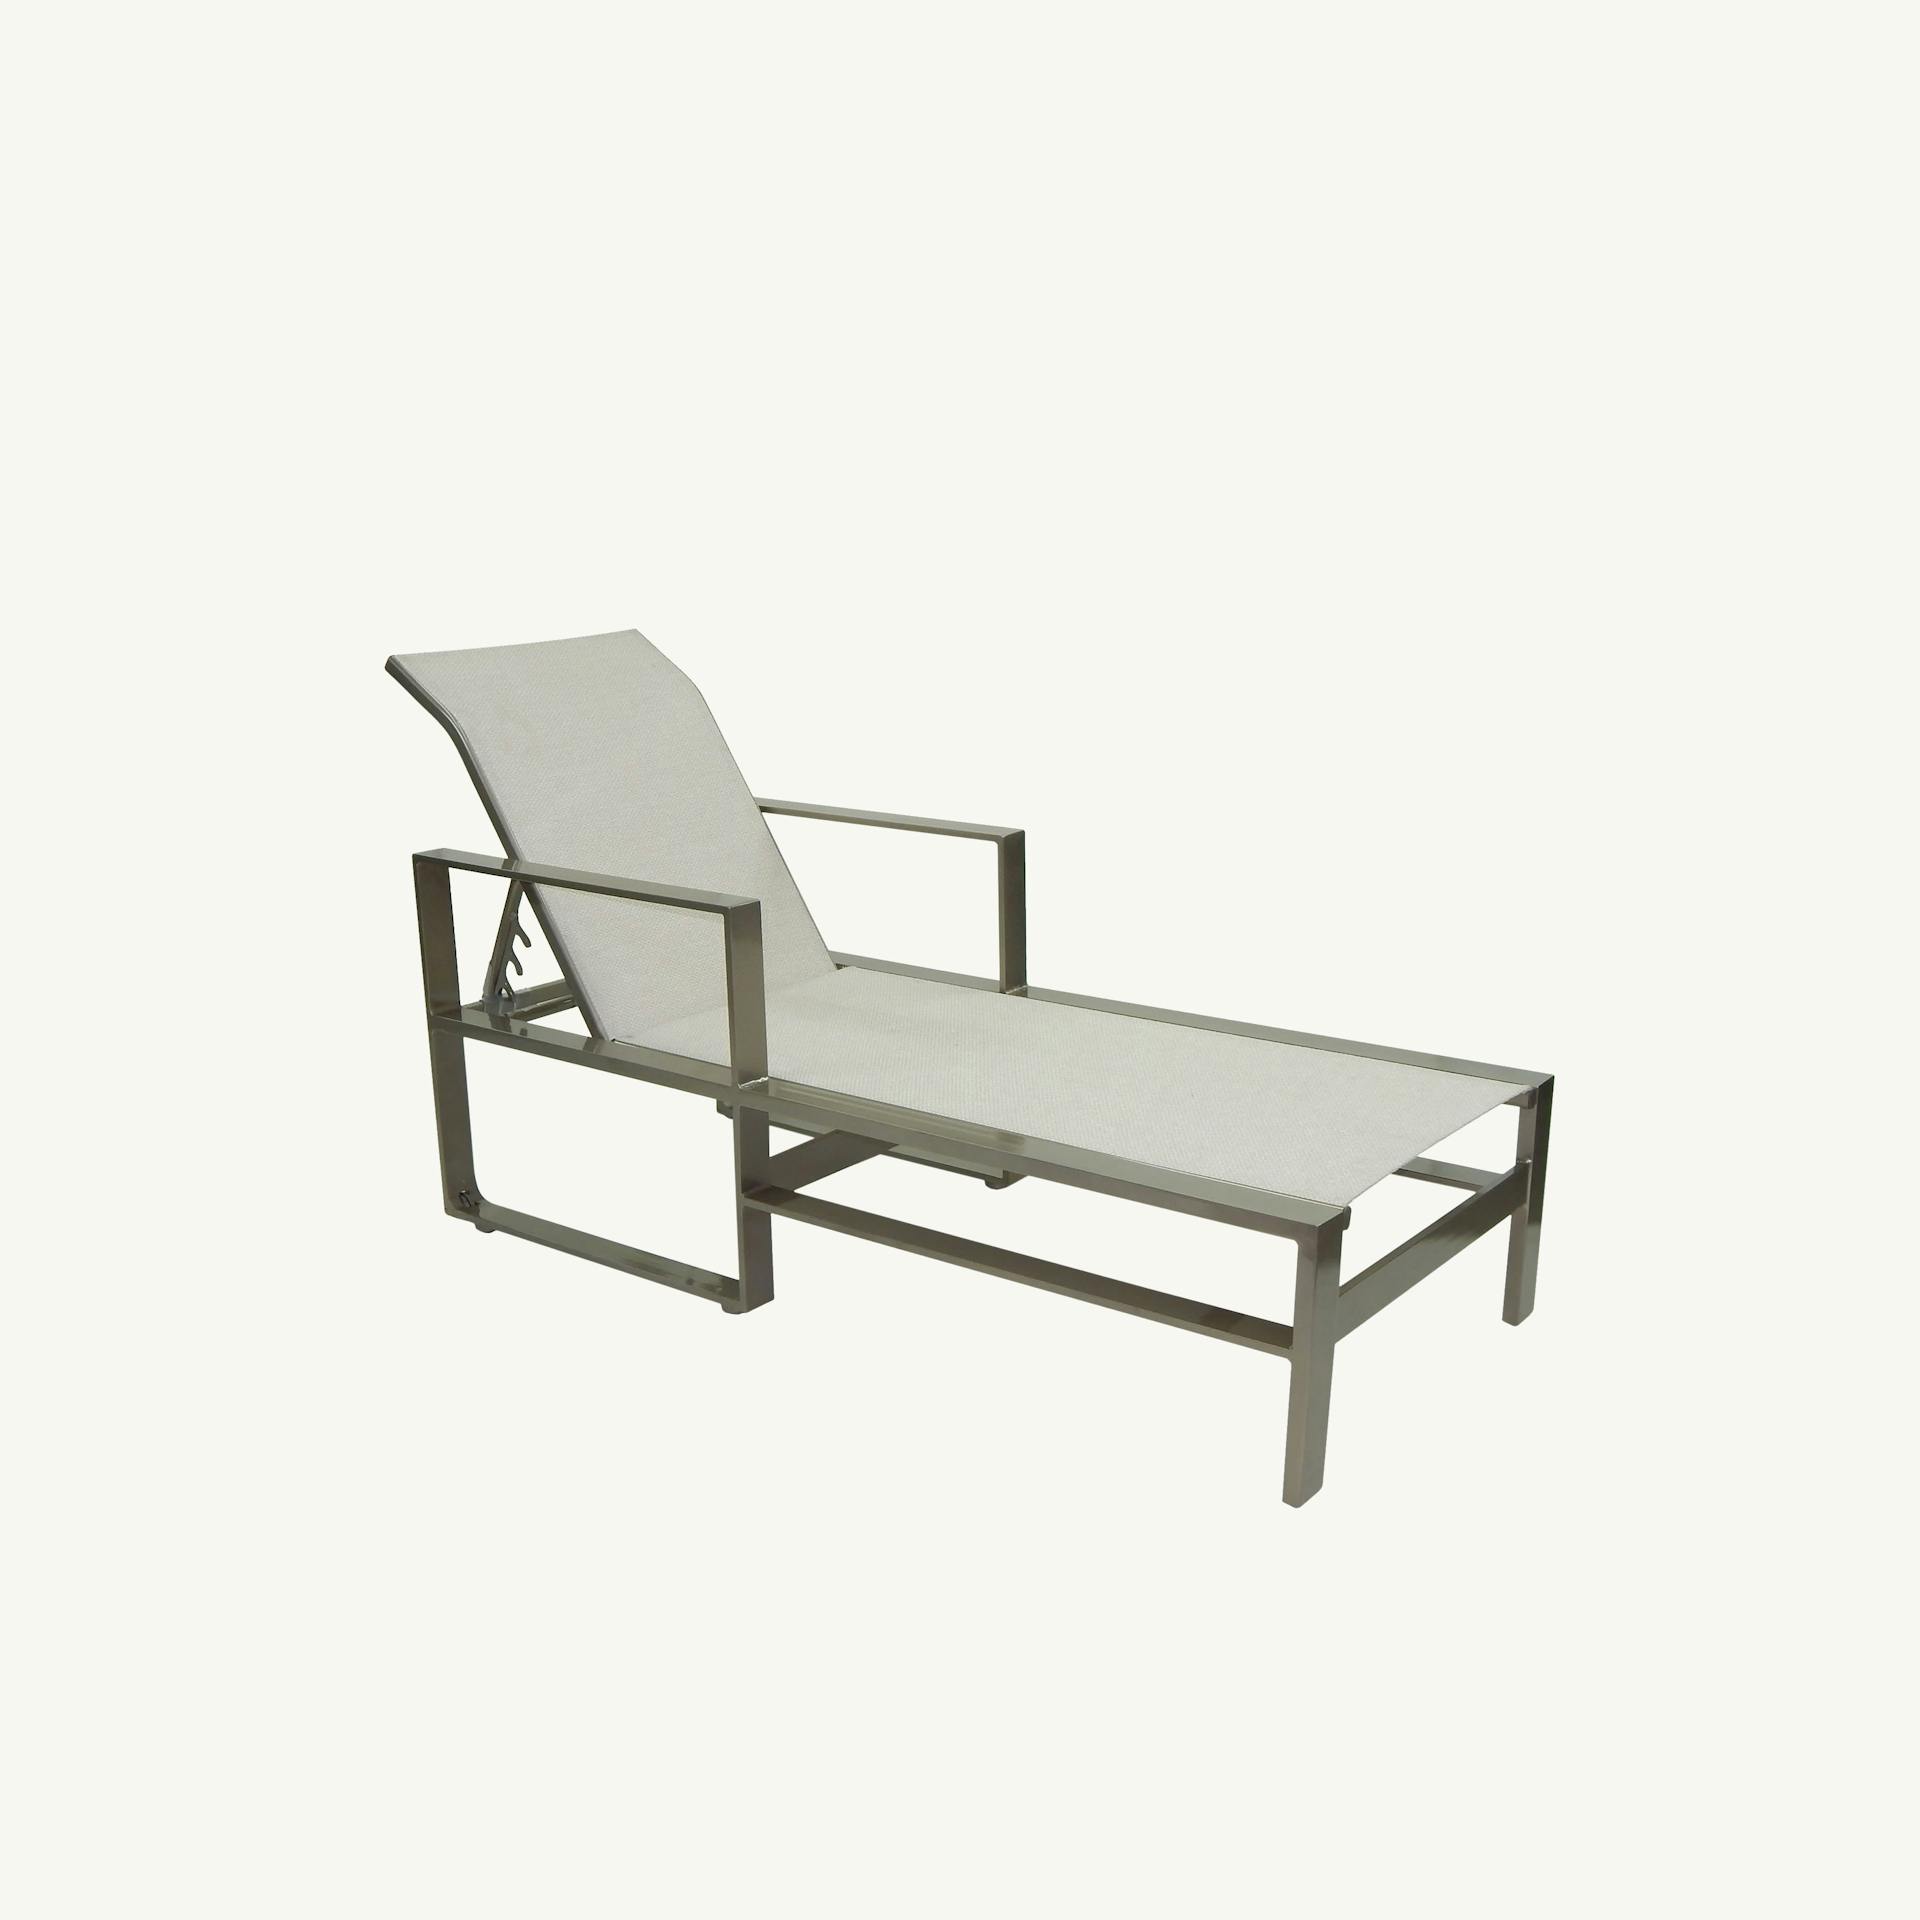 Park Place Adjustable Sling Chaise Lounge